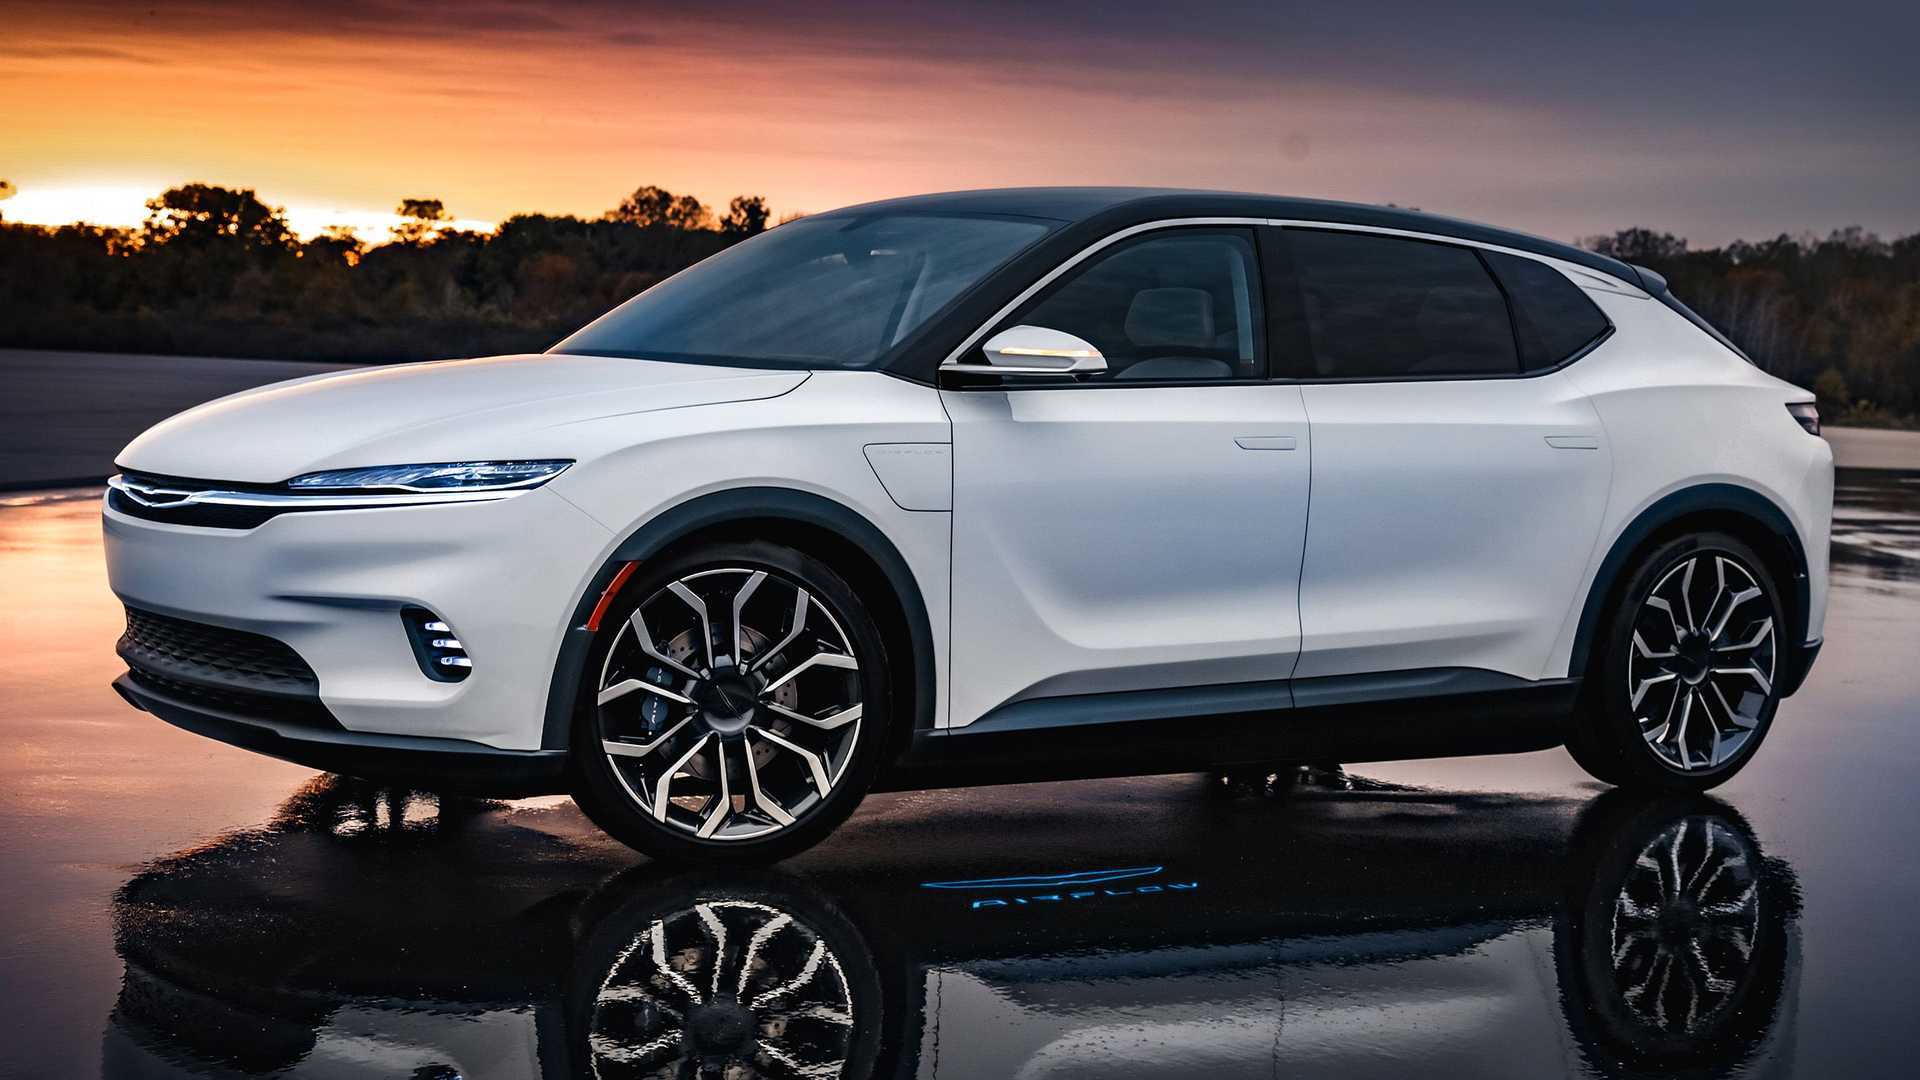 chrysler still aims for new ev in 2025, may be airflow-inspired: ceo